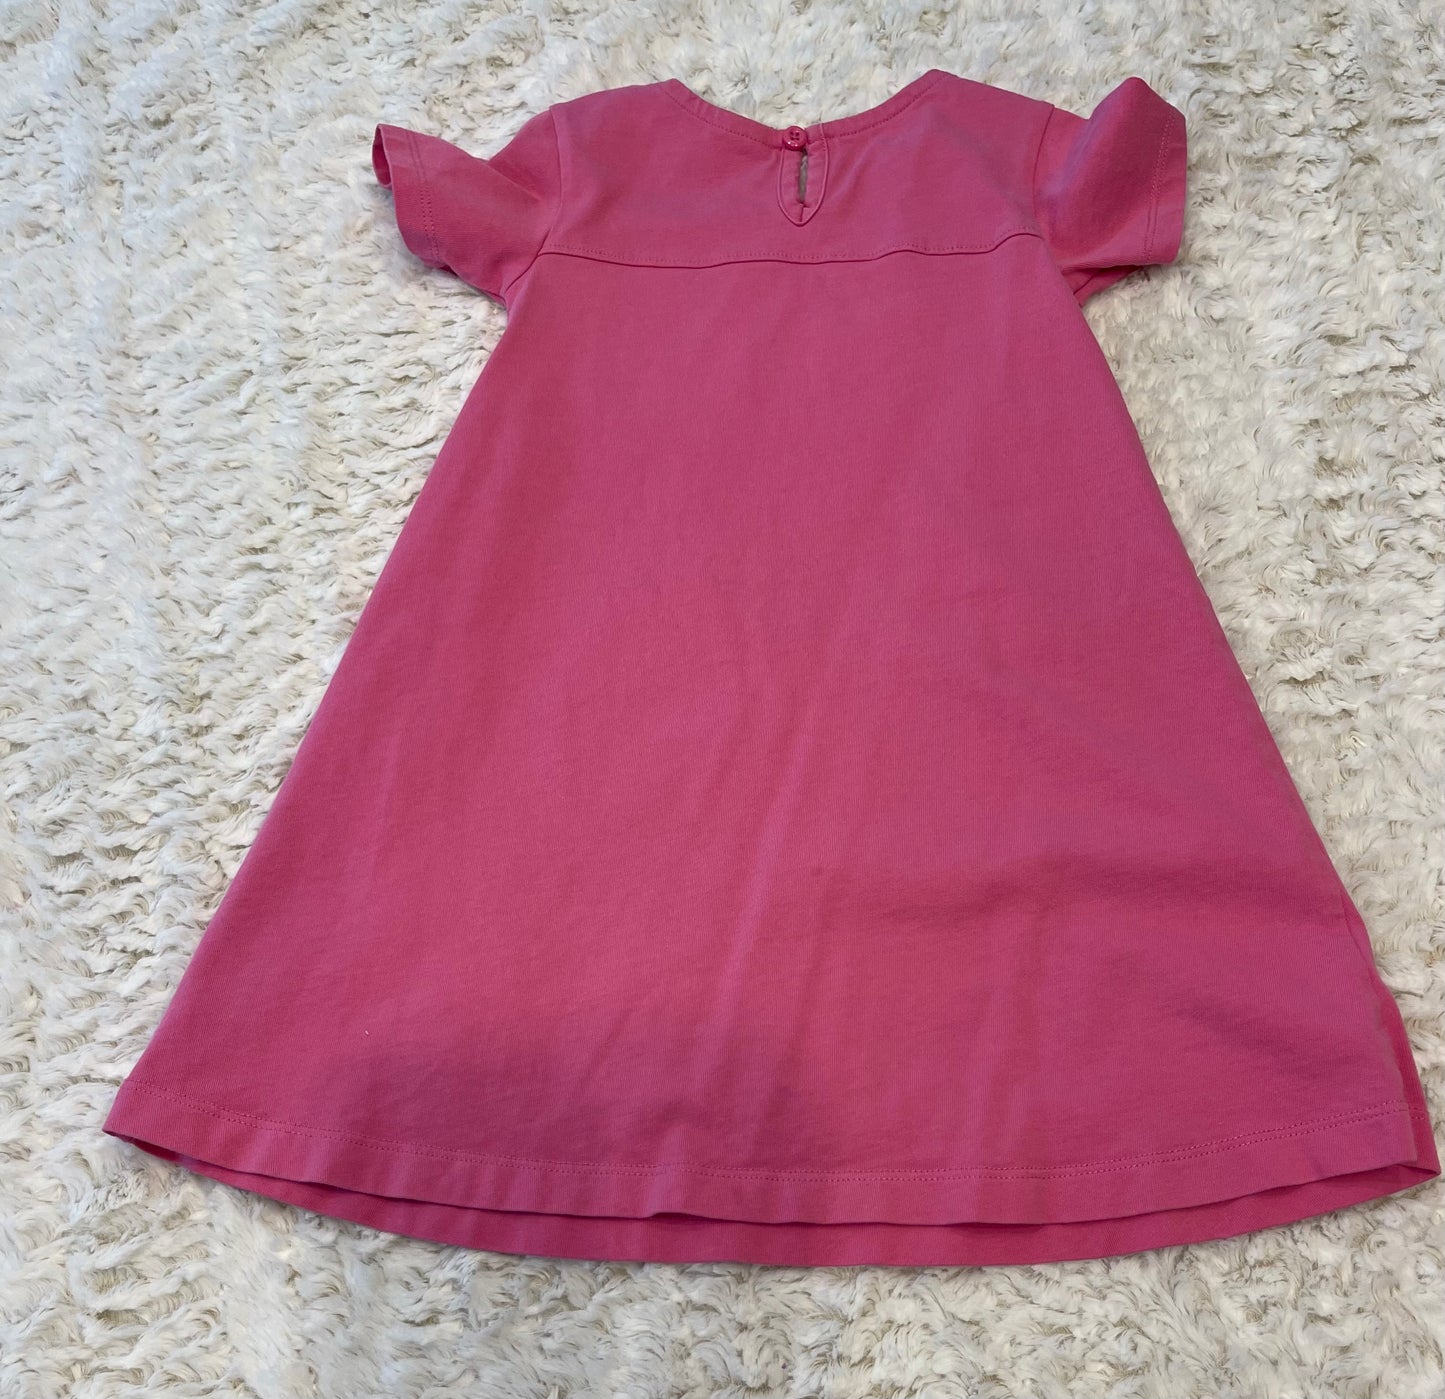 3T Hanna Andersson dress